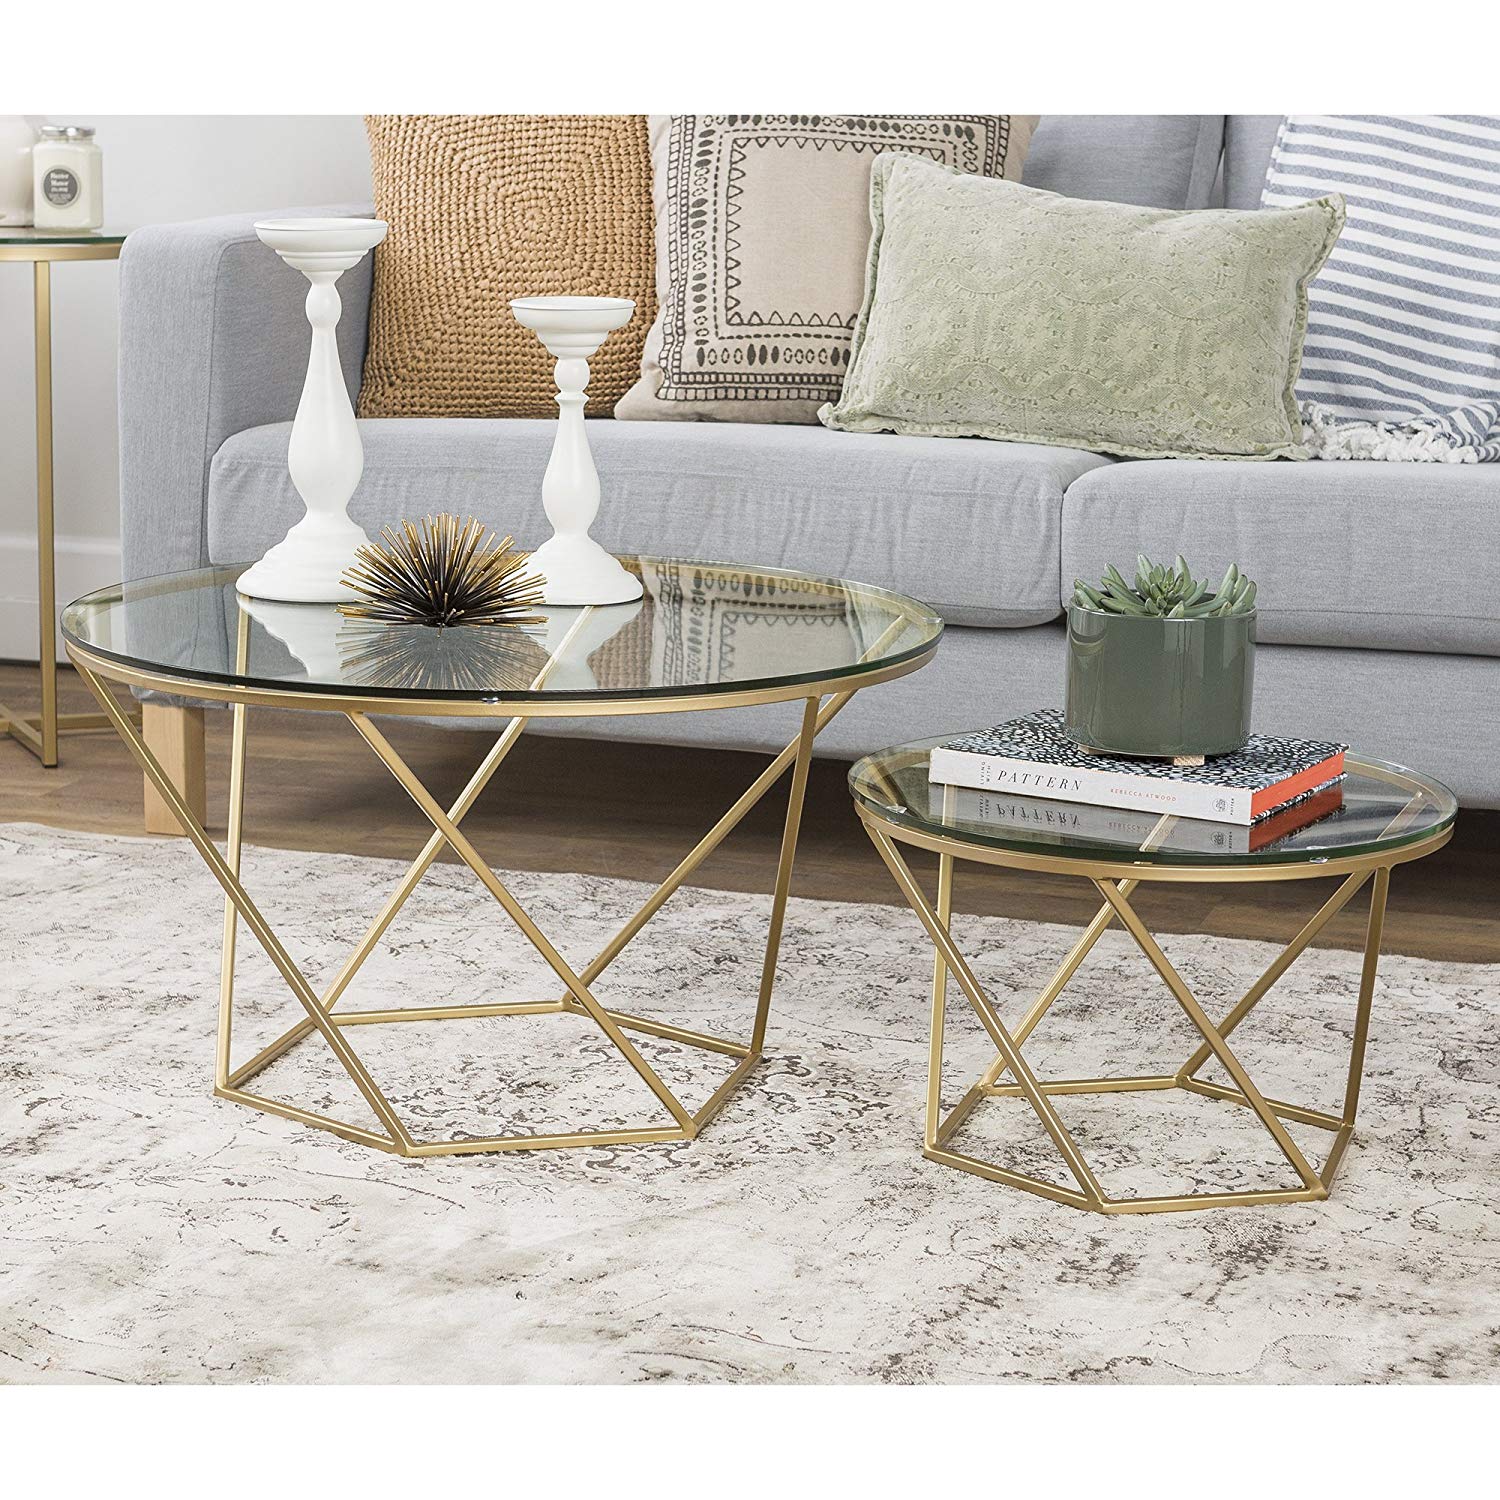 furniture geometric glass nesting coffee tables bxel gold accent table with top kitchen dining exterior black nest green lamp side drawer white perspex hardwood floor tile